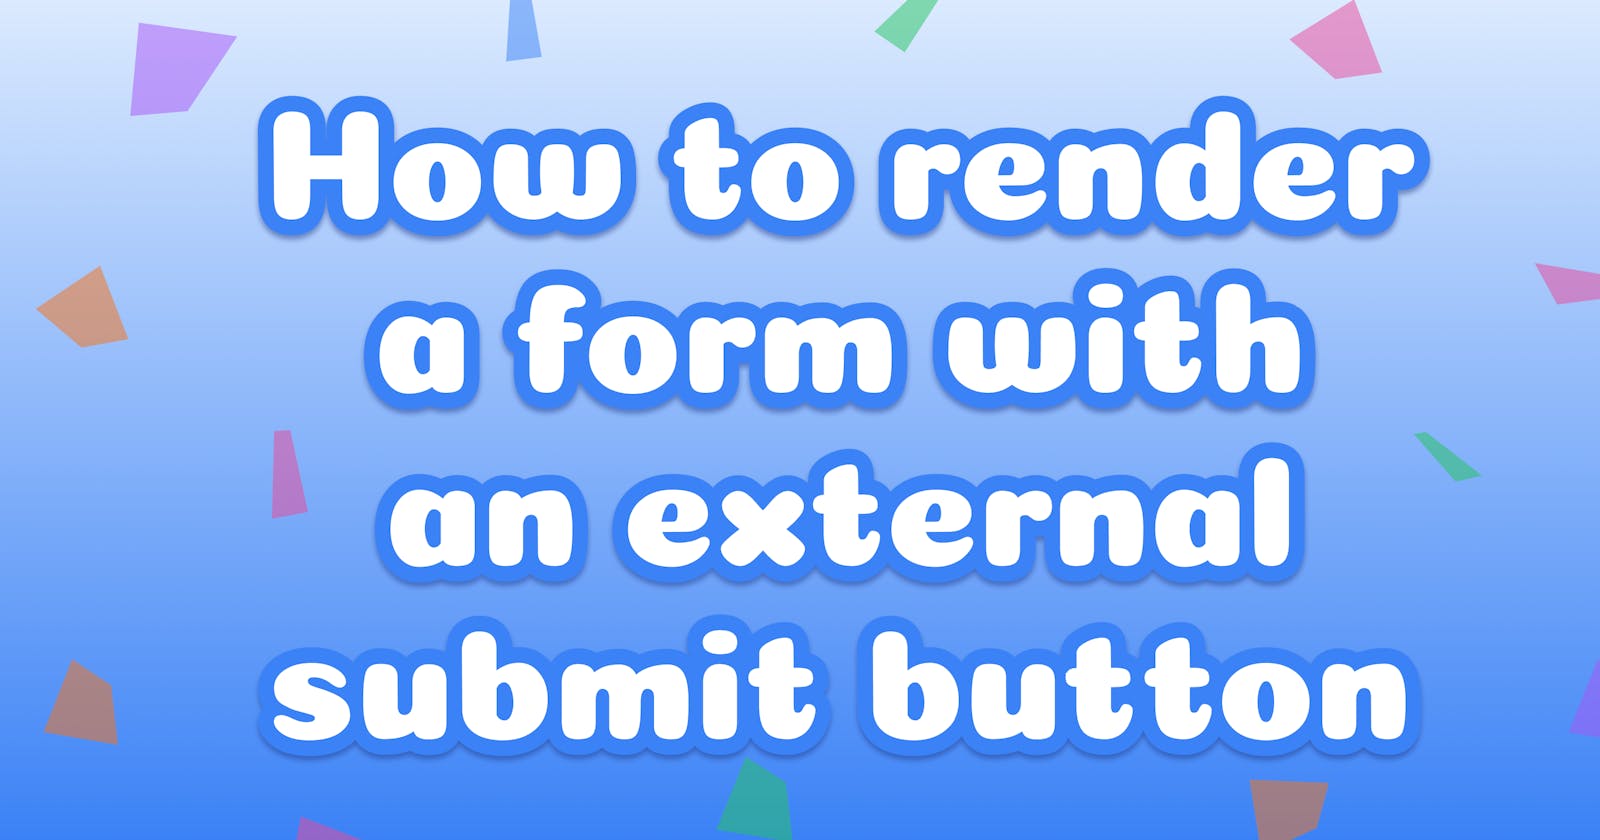 How to render a form with an external submit button